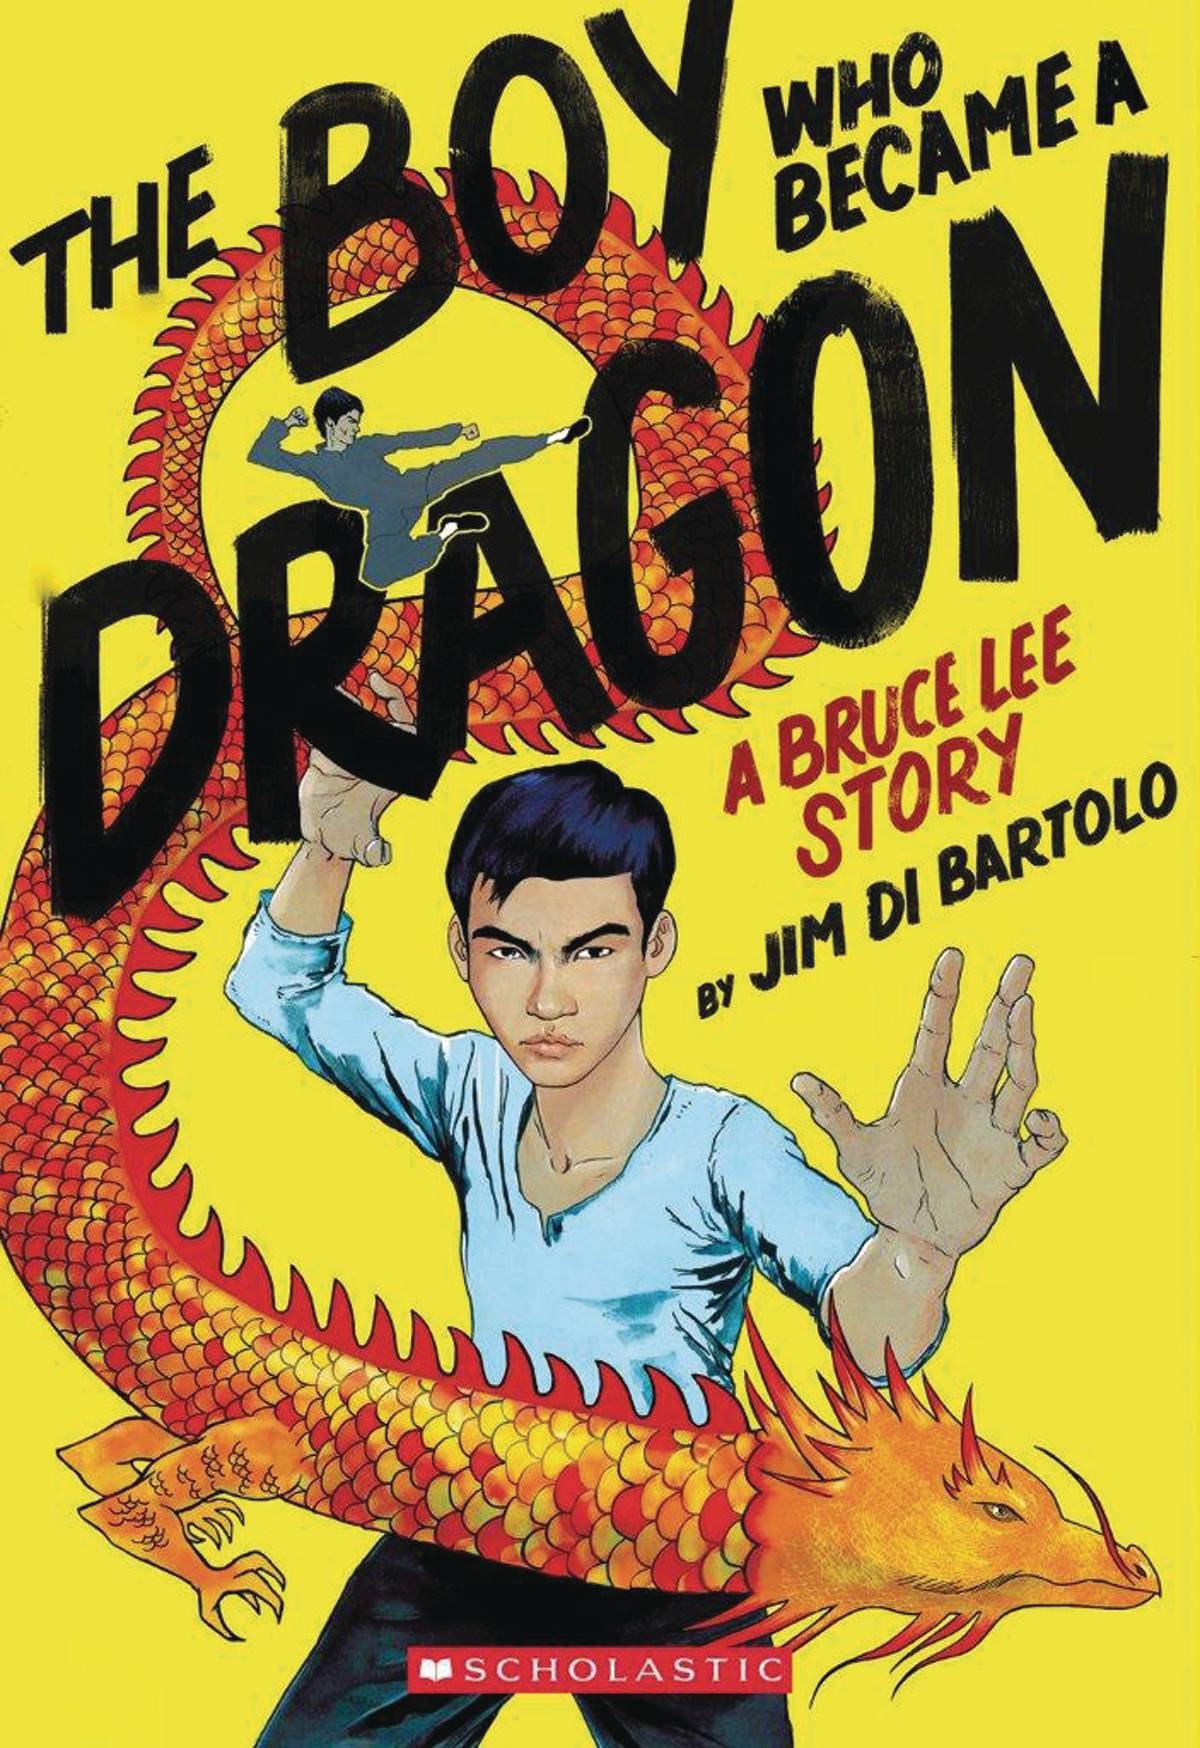 Boy Who Became A Dragon A Bruce Lee Story